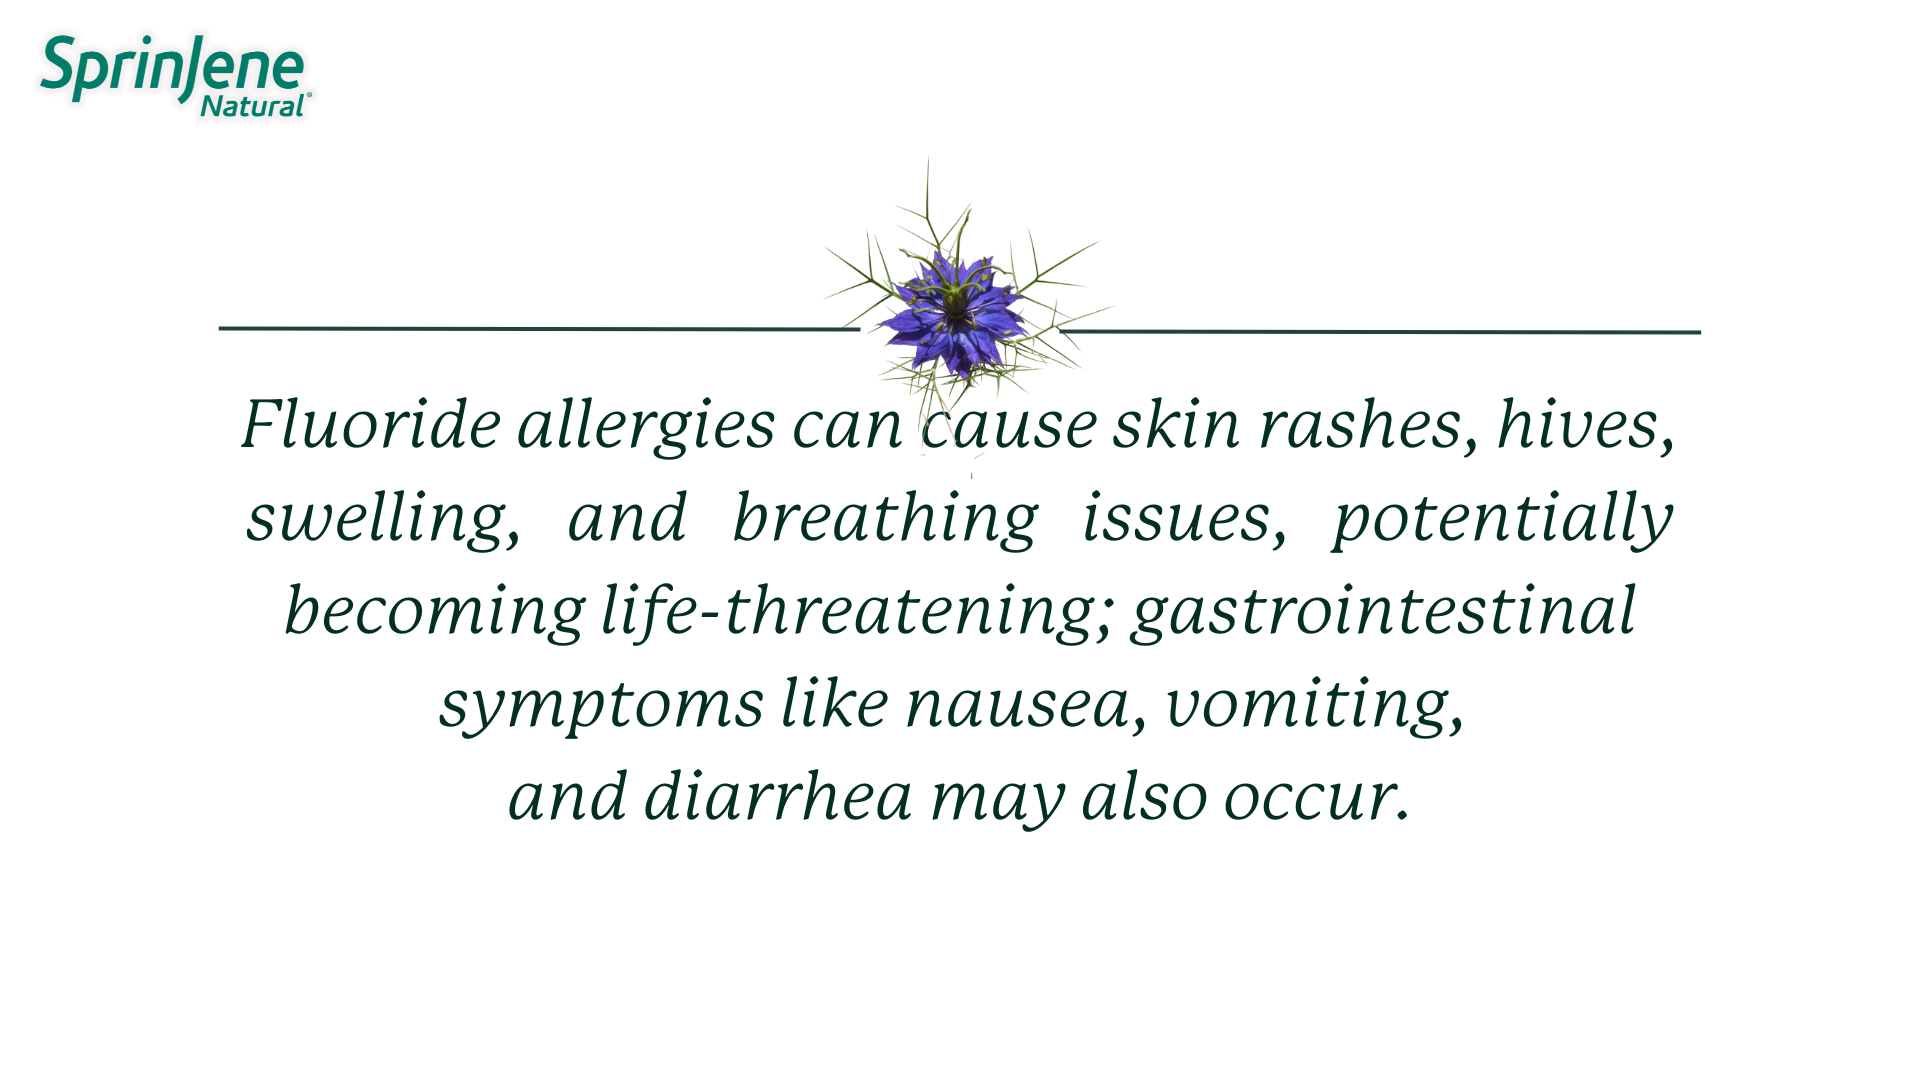 Fluoride allergies can cause skin rashes, hives, swelling, and breathing issues